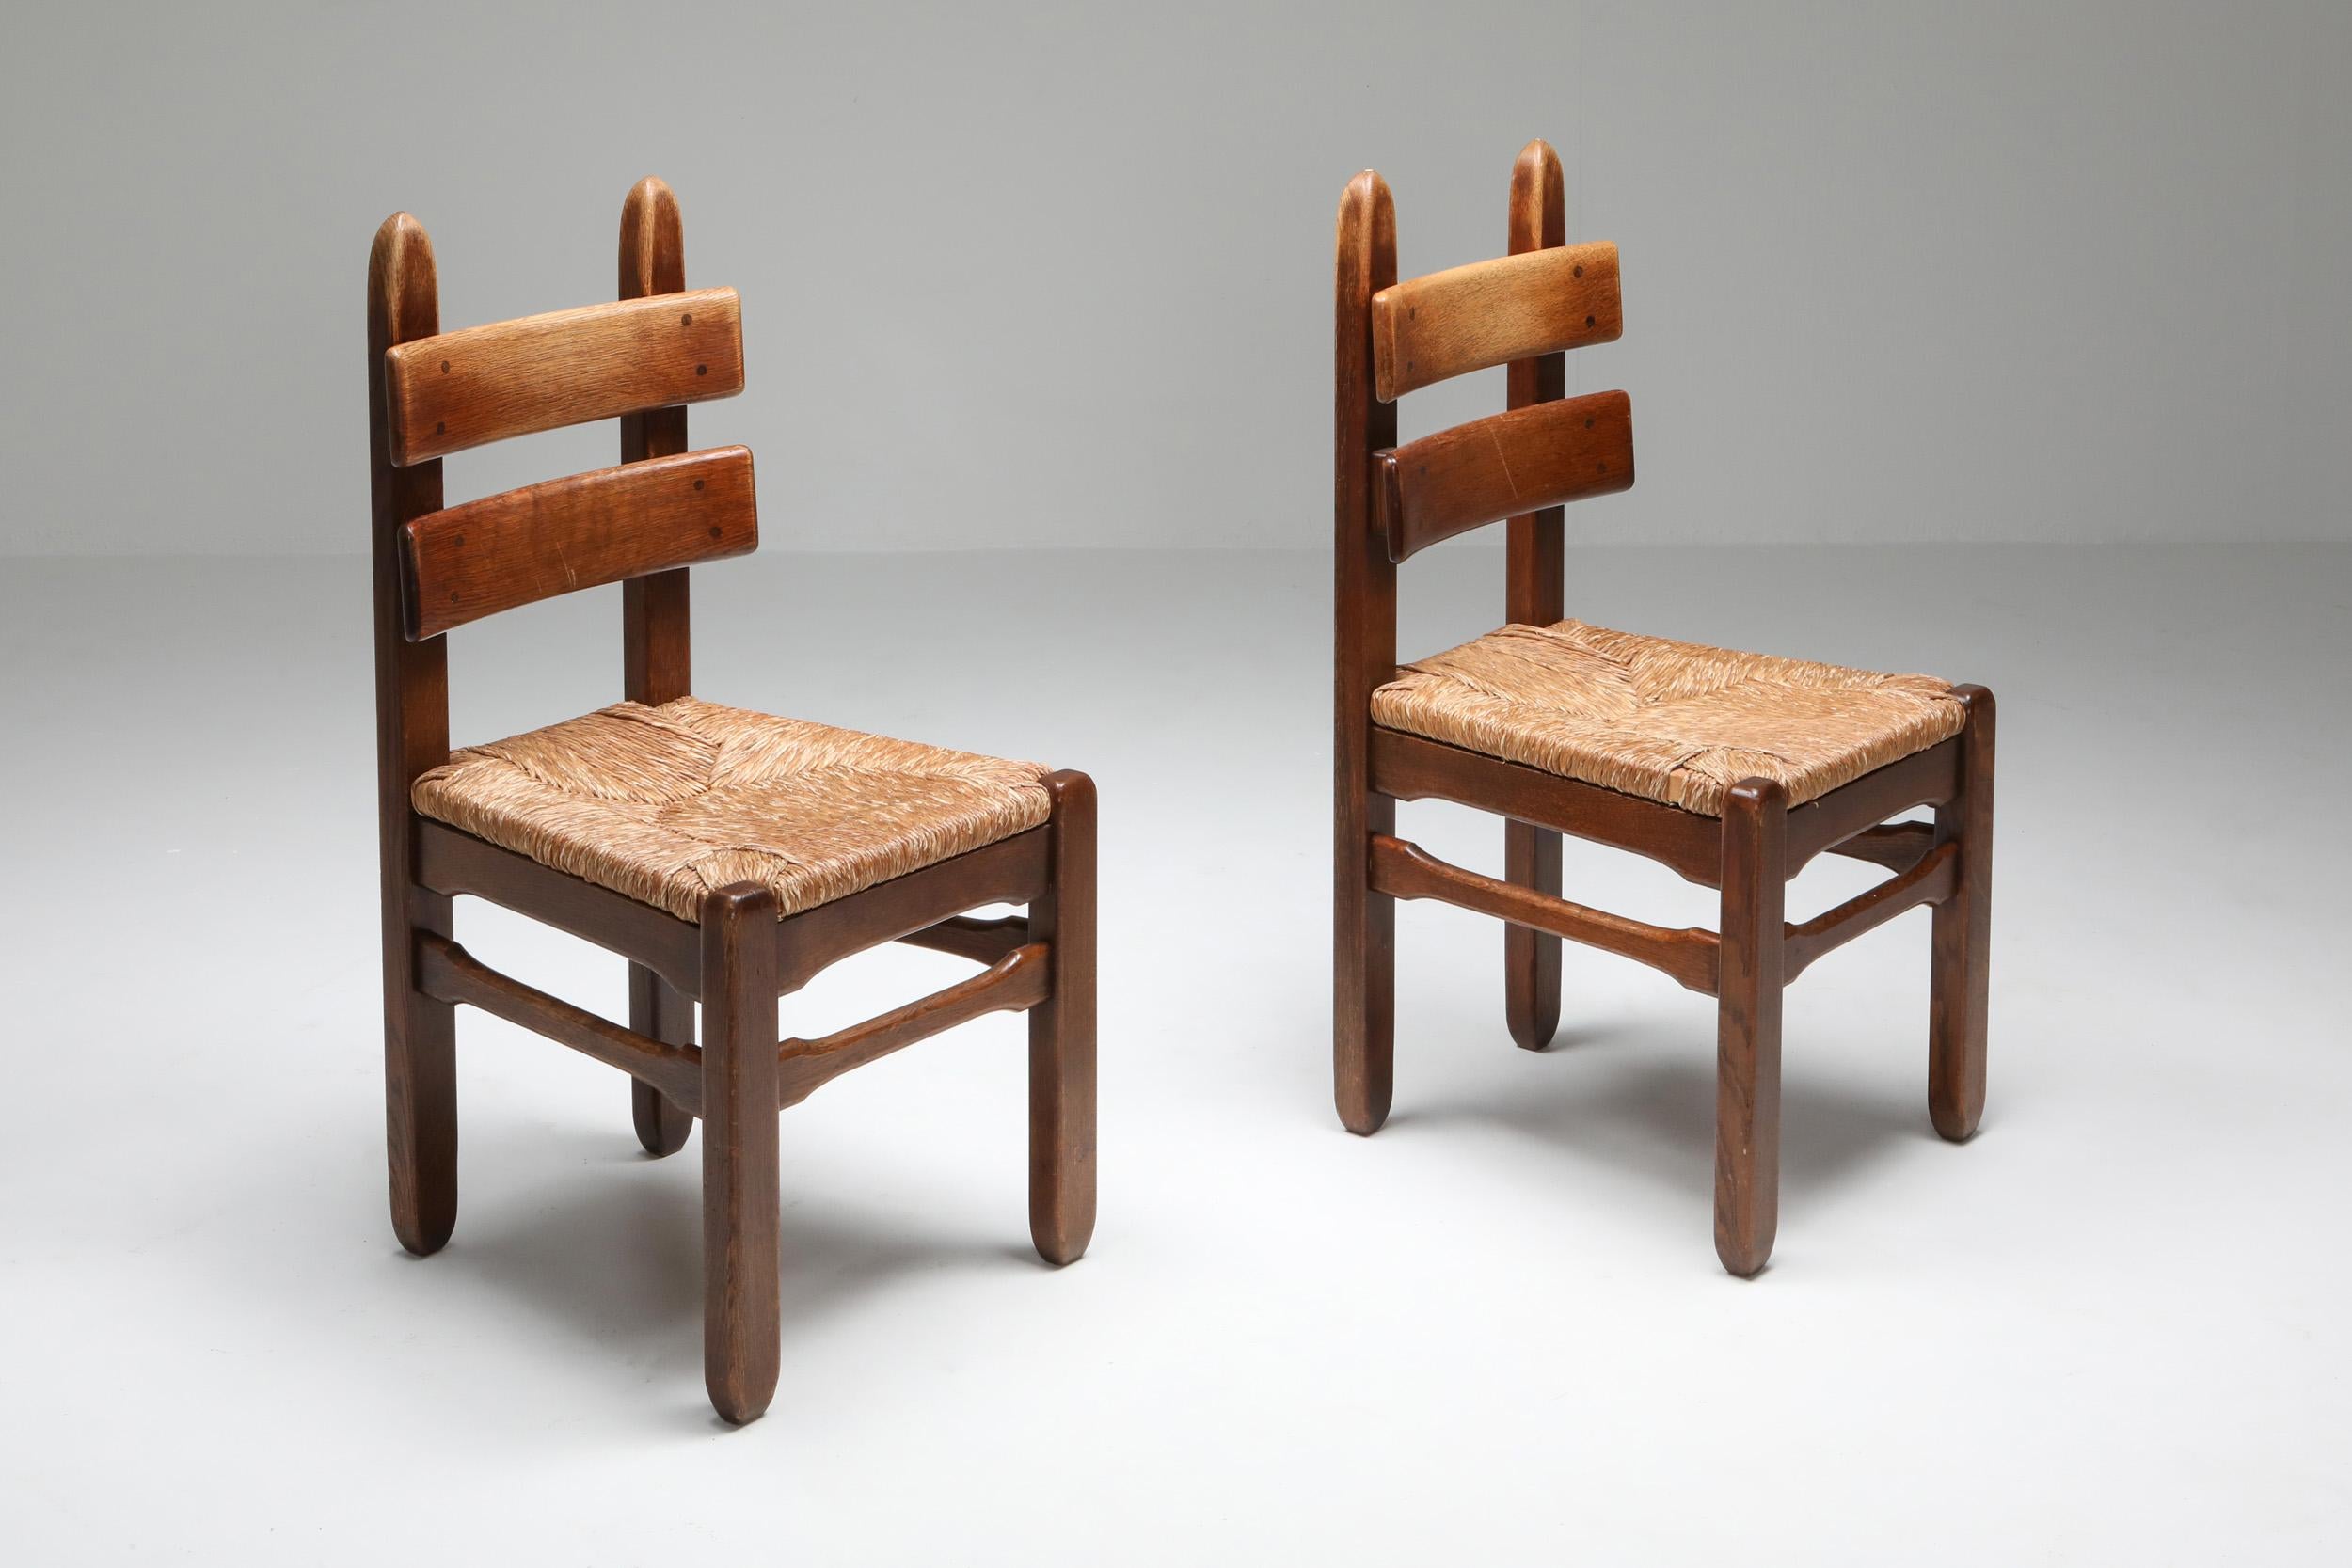 20th Century Rustic Modern Oak and Cord Chairs